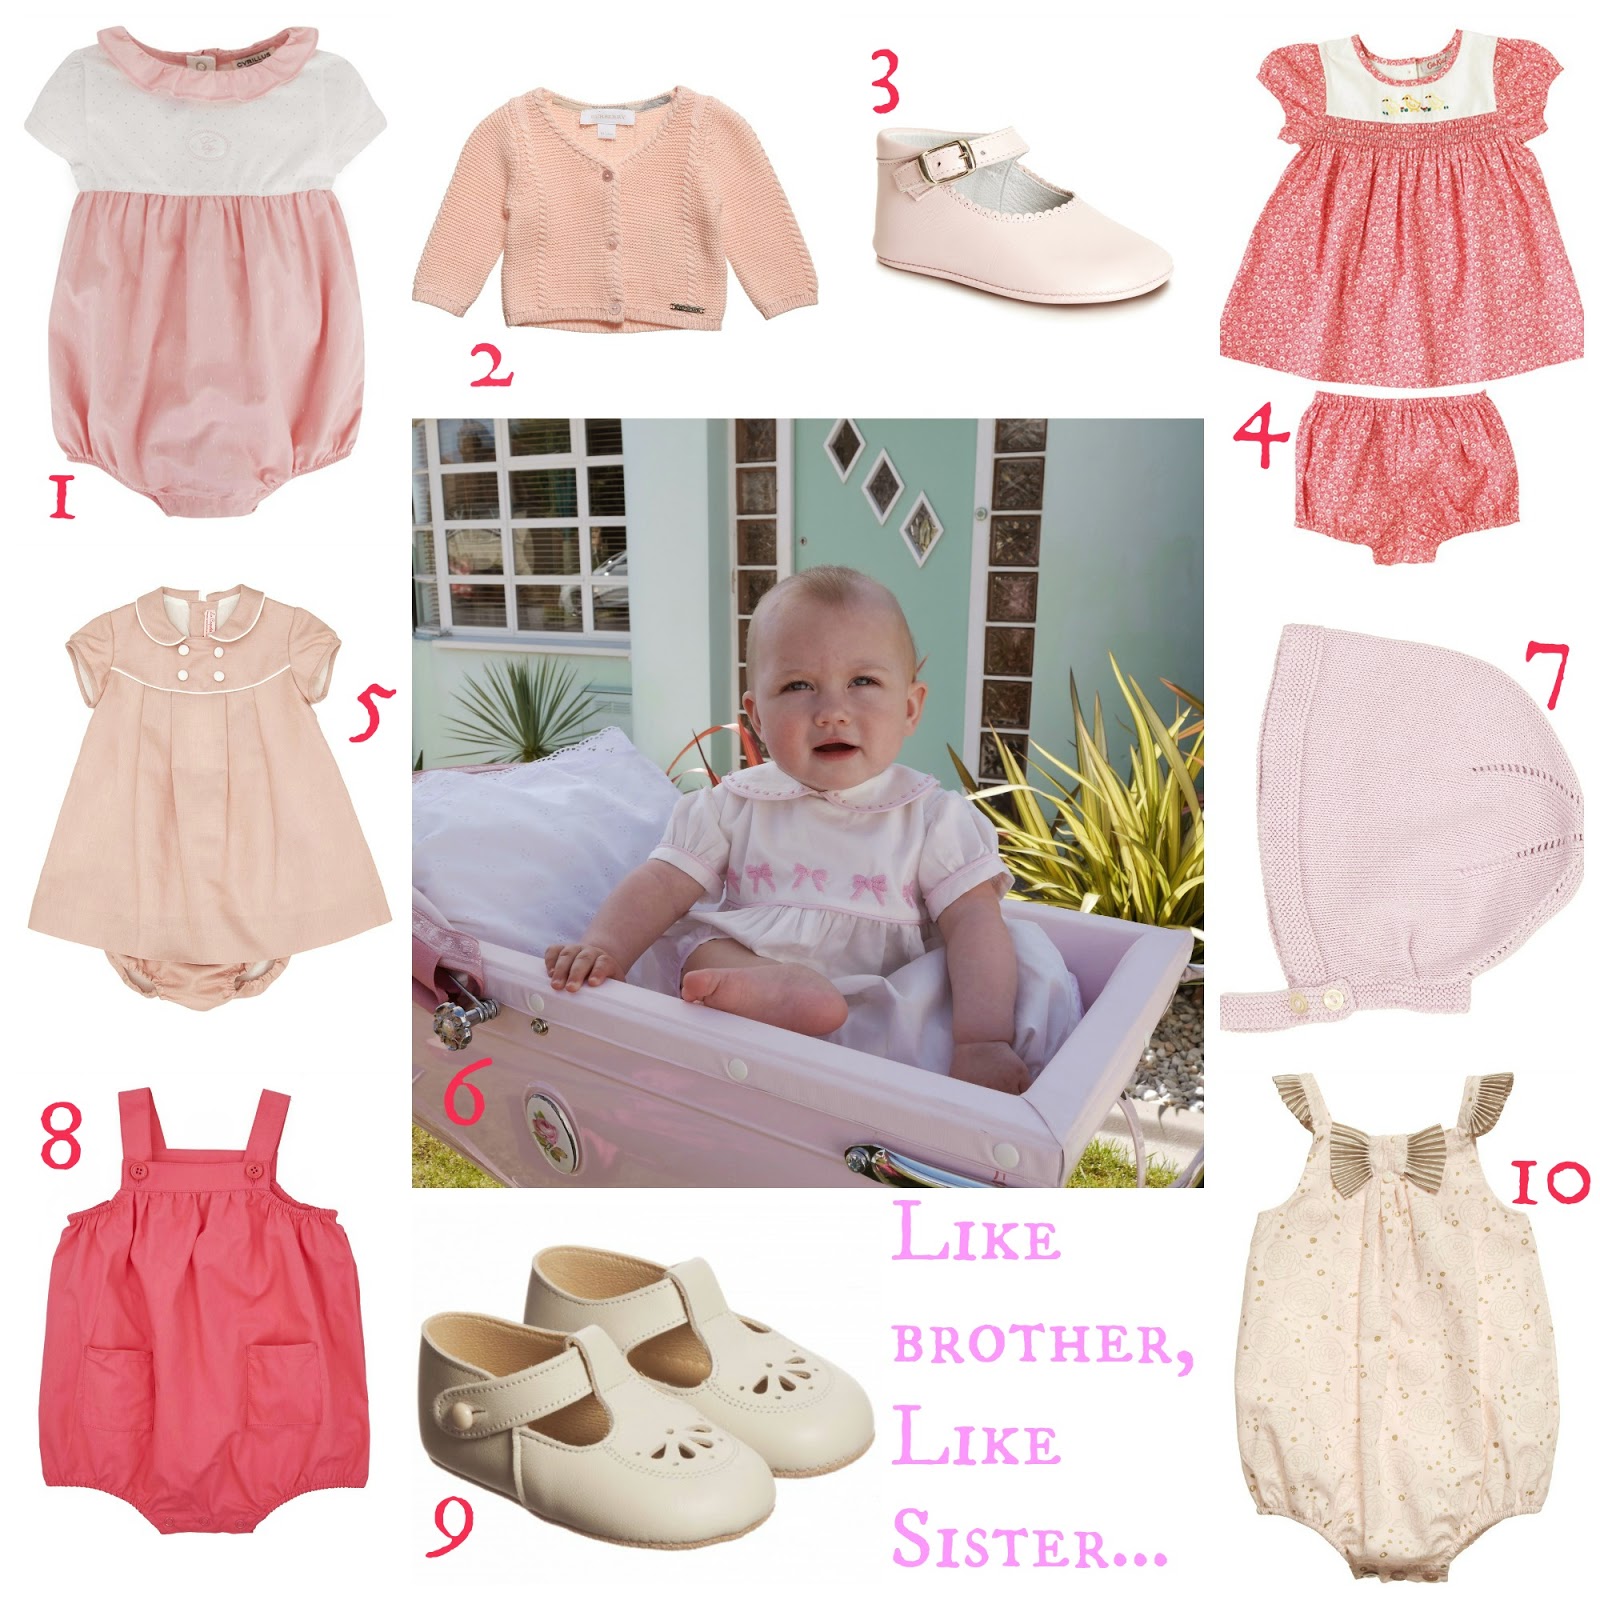 mamasVIB | V. I. BABY: 10 Perfect pink pieces for the new Princess | princess charlotte | royal baby | duke and duchess | duke and duchess of cmabridge | new royal baby | prince george | baby sister | royal baby | princess charlotte elizabteh diana | new baby | new royal baby | baby clothes | clothes fit for a princess | royal fashion | the george effect  the kate effect | british royal baby | baby clothes | new baby | lindo wing | kensington palace | william | prince william | kate | princess kate | mamasvib | baby | princess | new royal | pink cloths | any clothes | baby fashion 